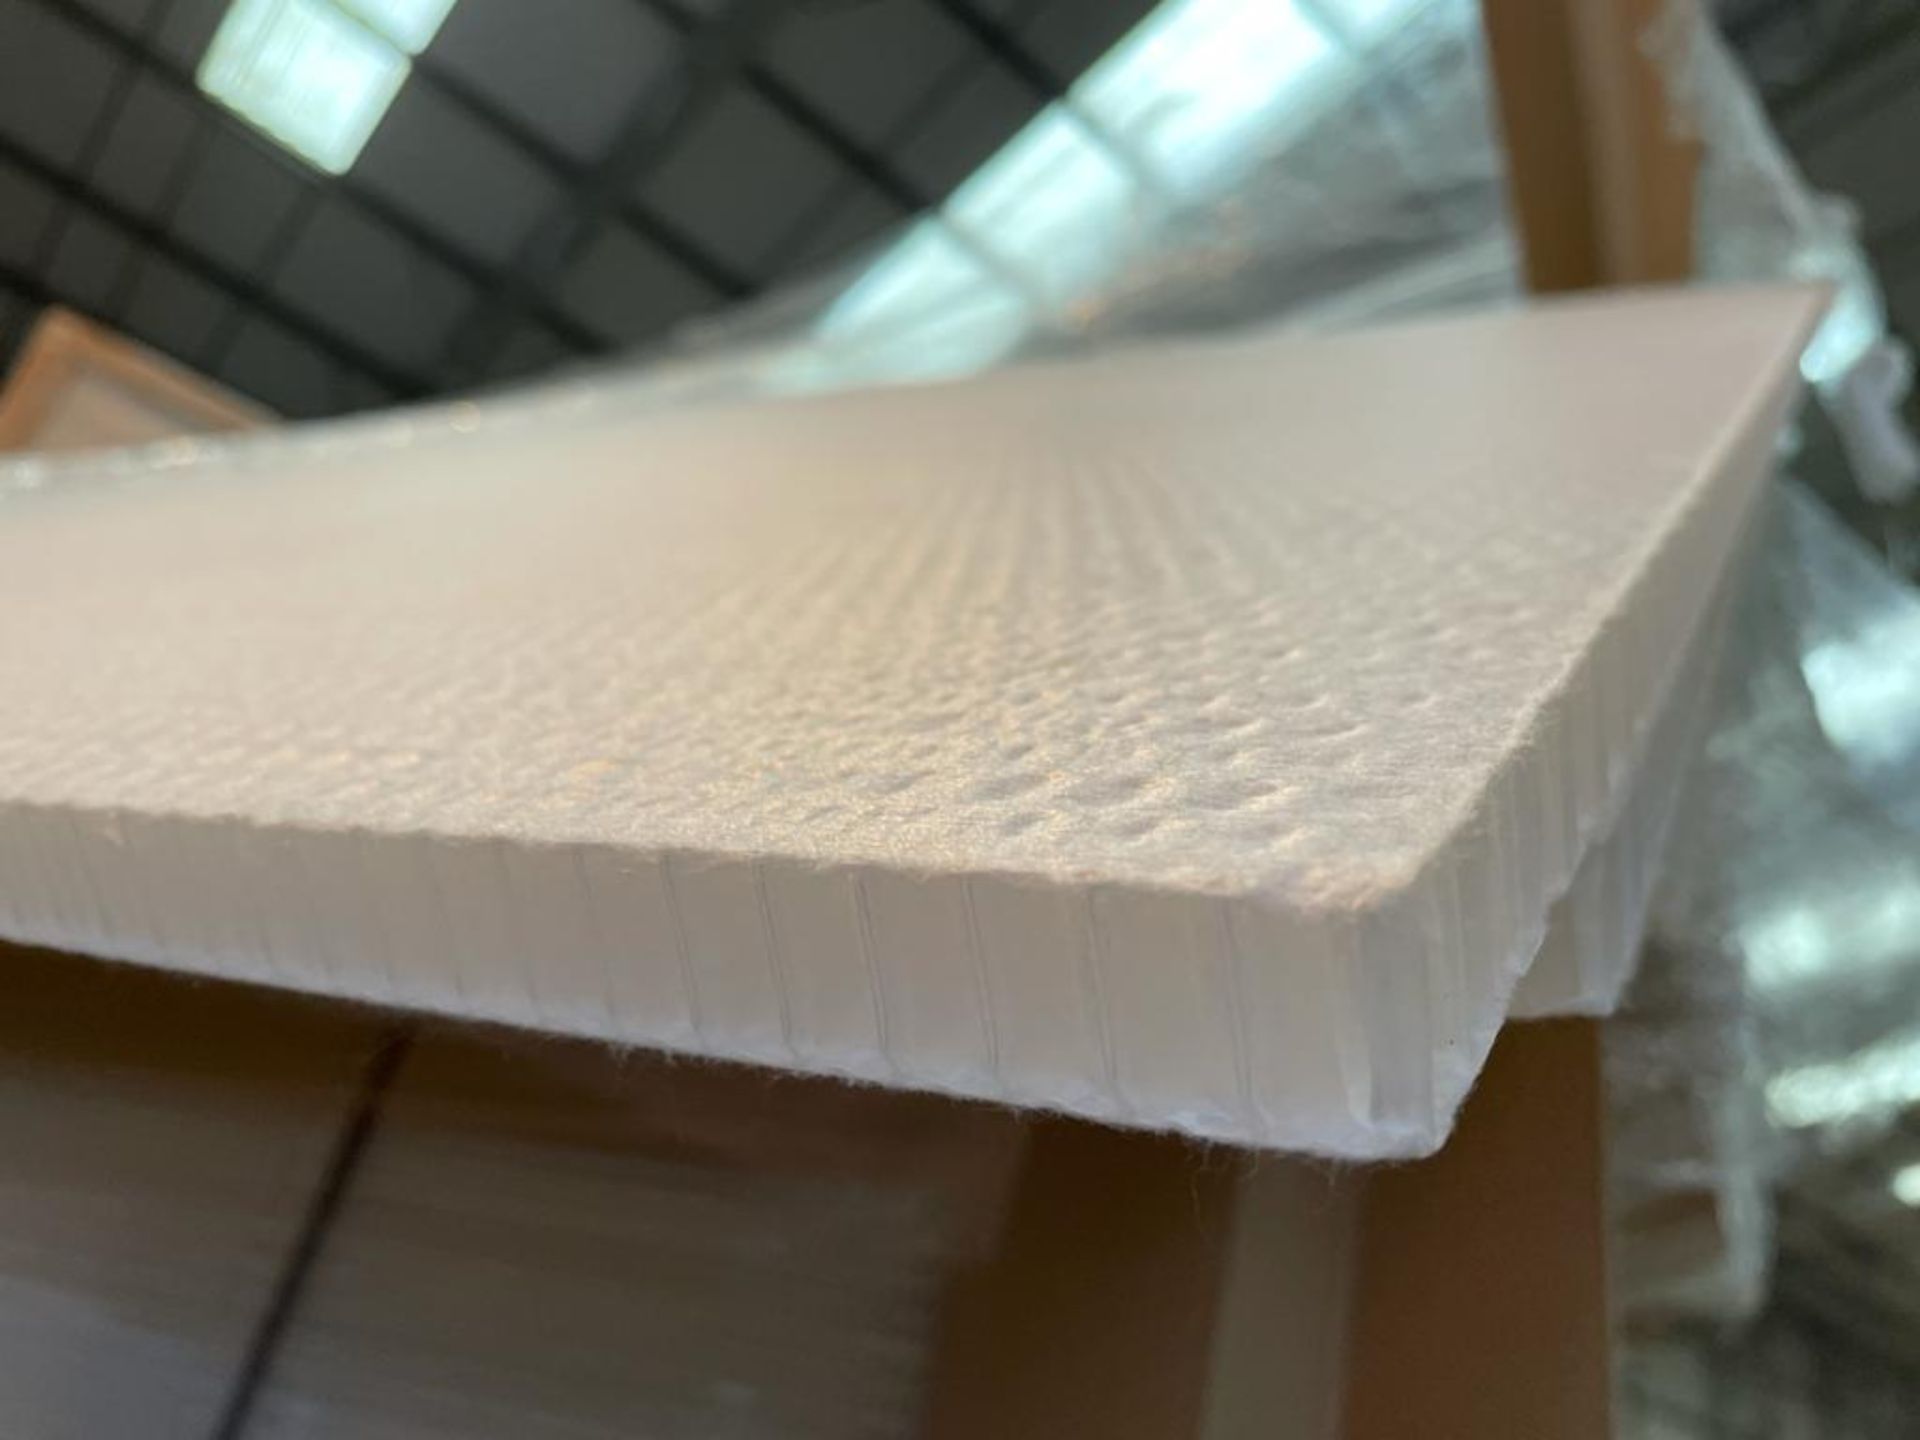 100 x ThermHex Thermoplastic Honeycomb Core Panels - Size: 3558 x 1215 x 20mm - New Stock - Lightwei - Image 5 of 7